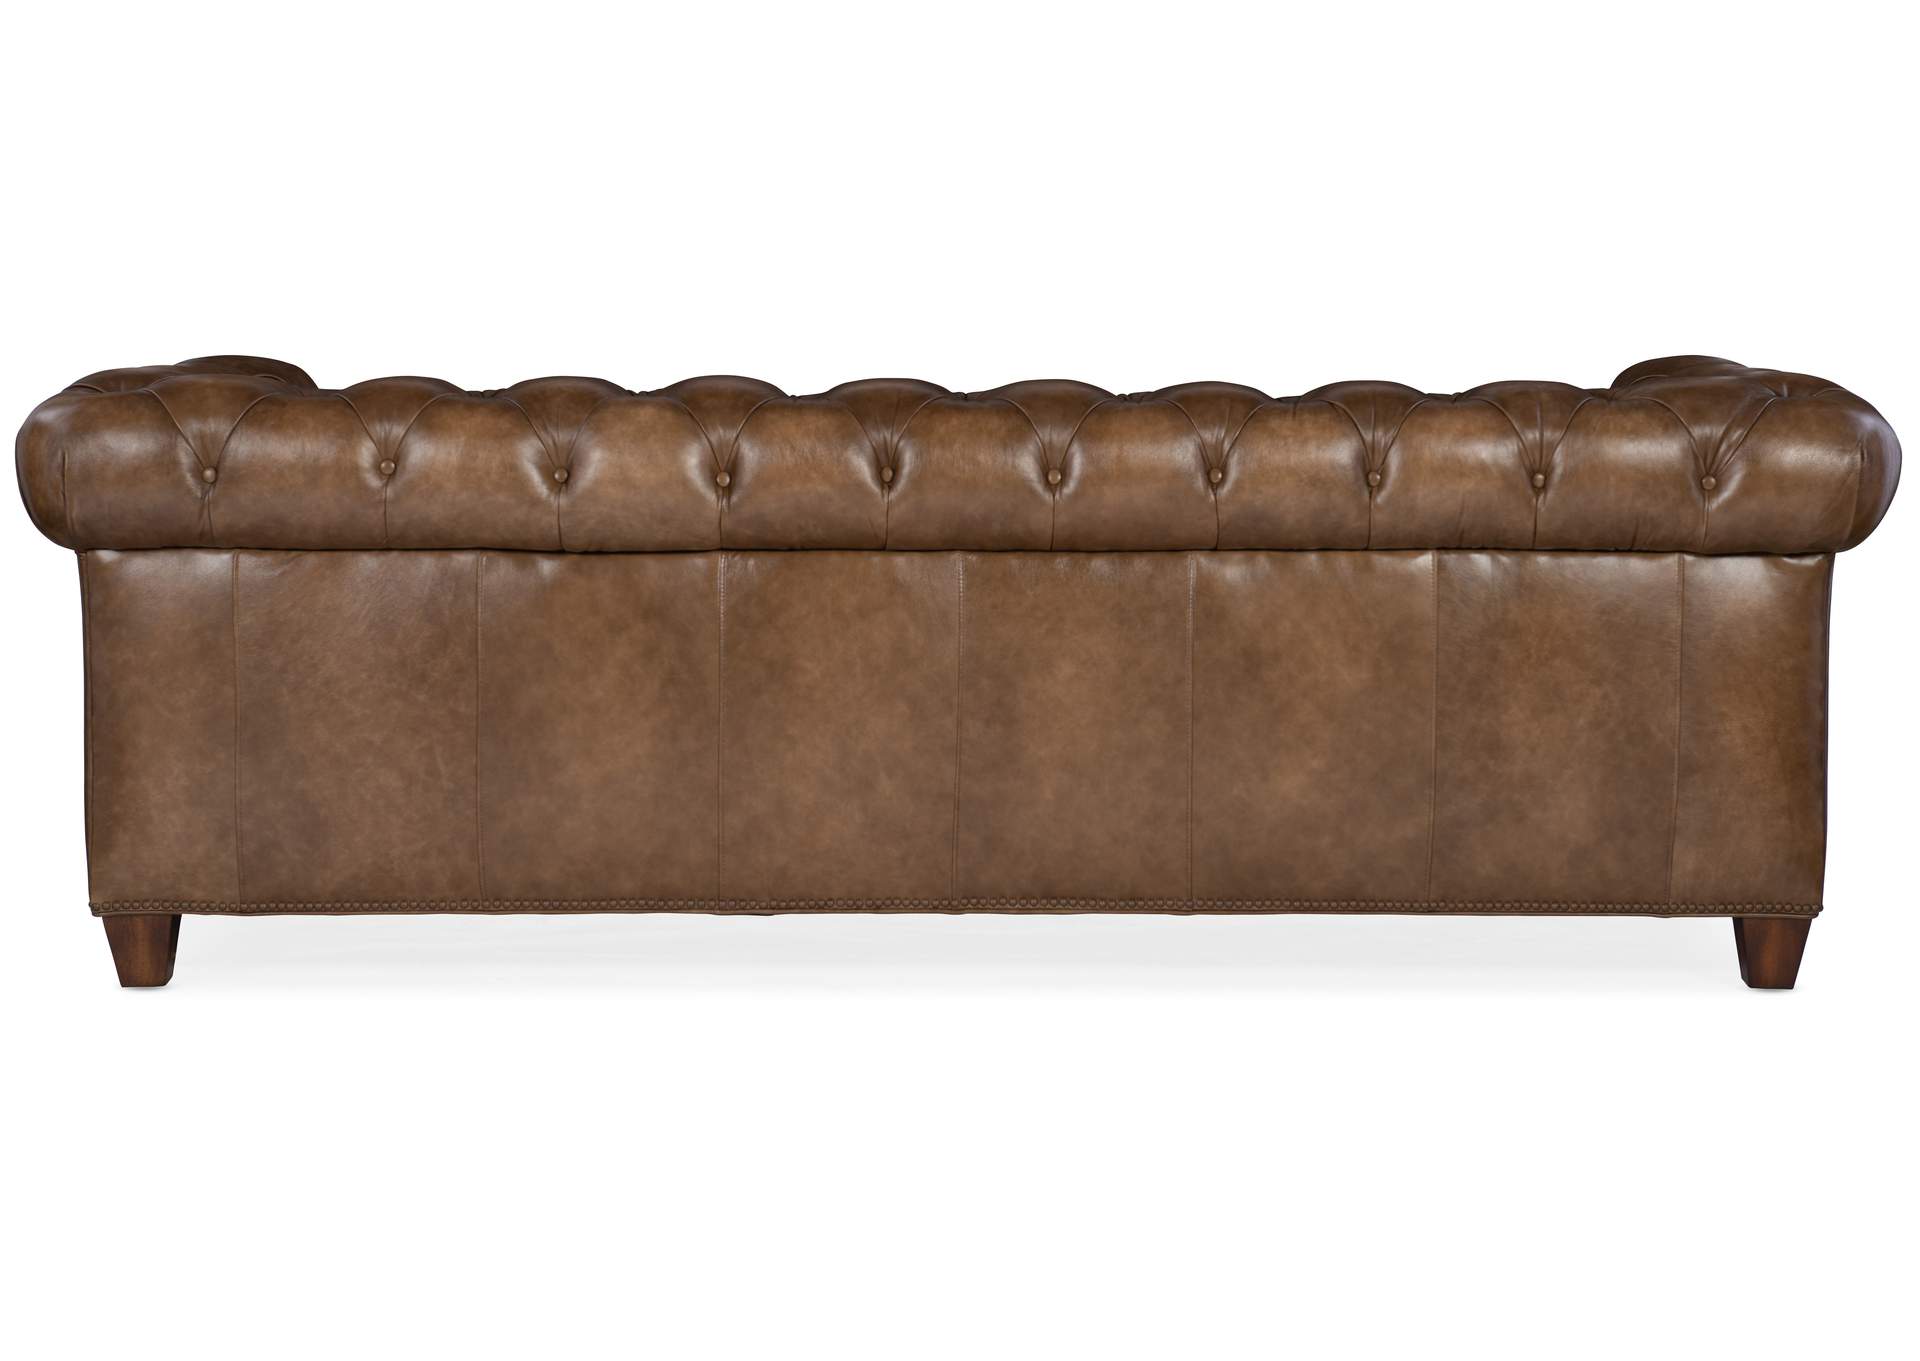 Chester Tufted Stationary Sofa,Hooker Furniture